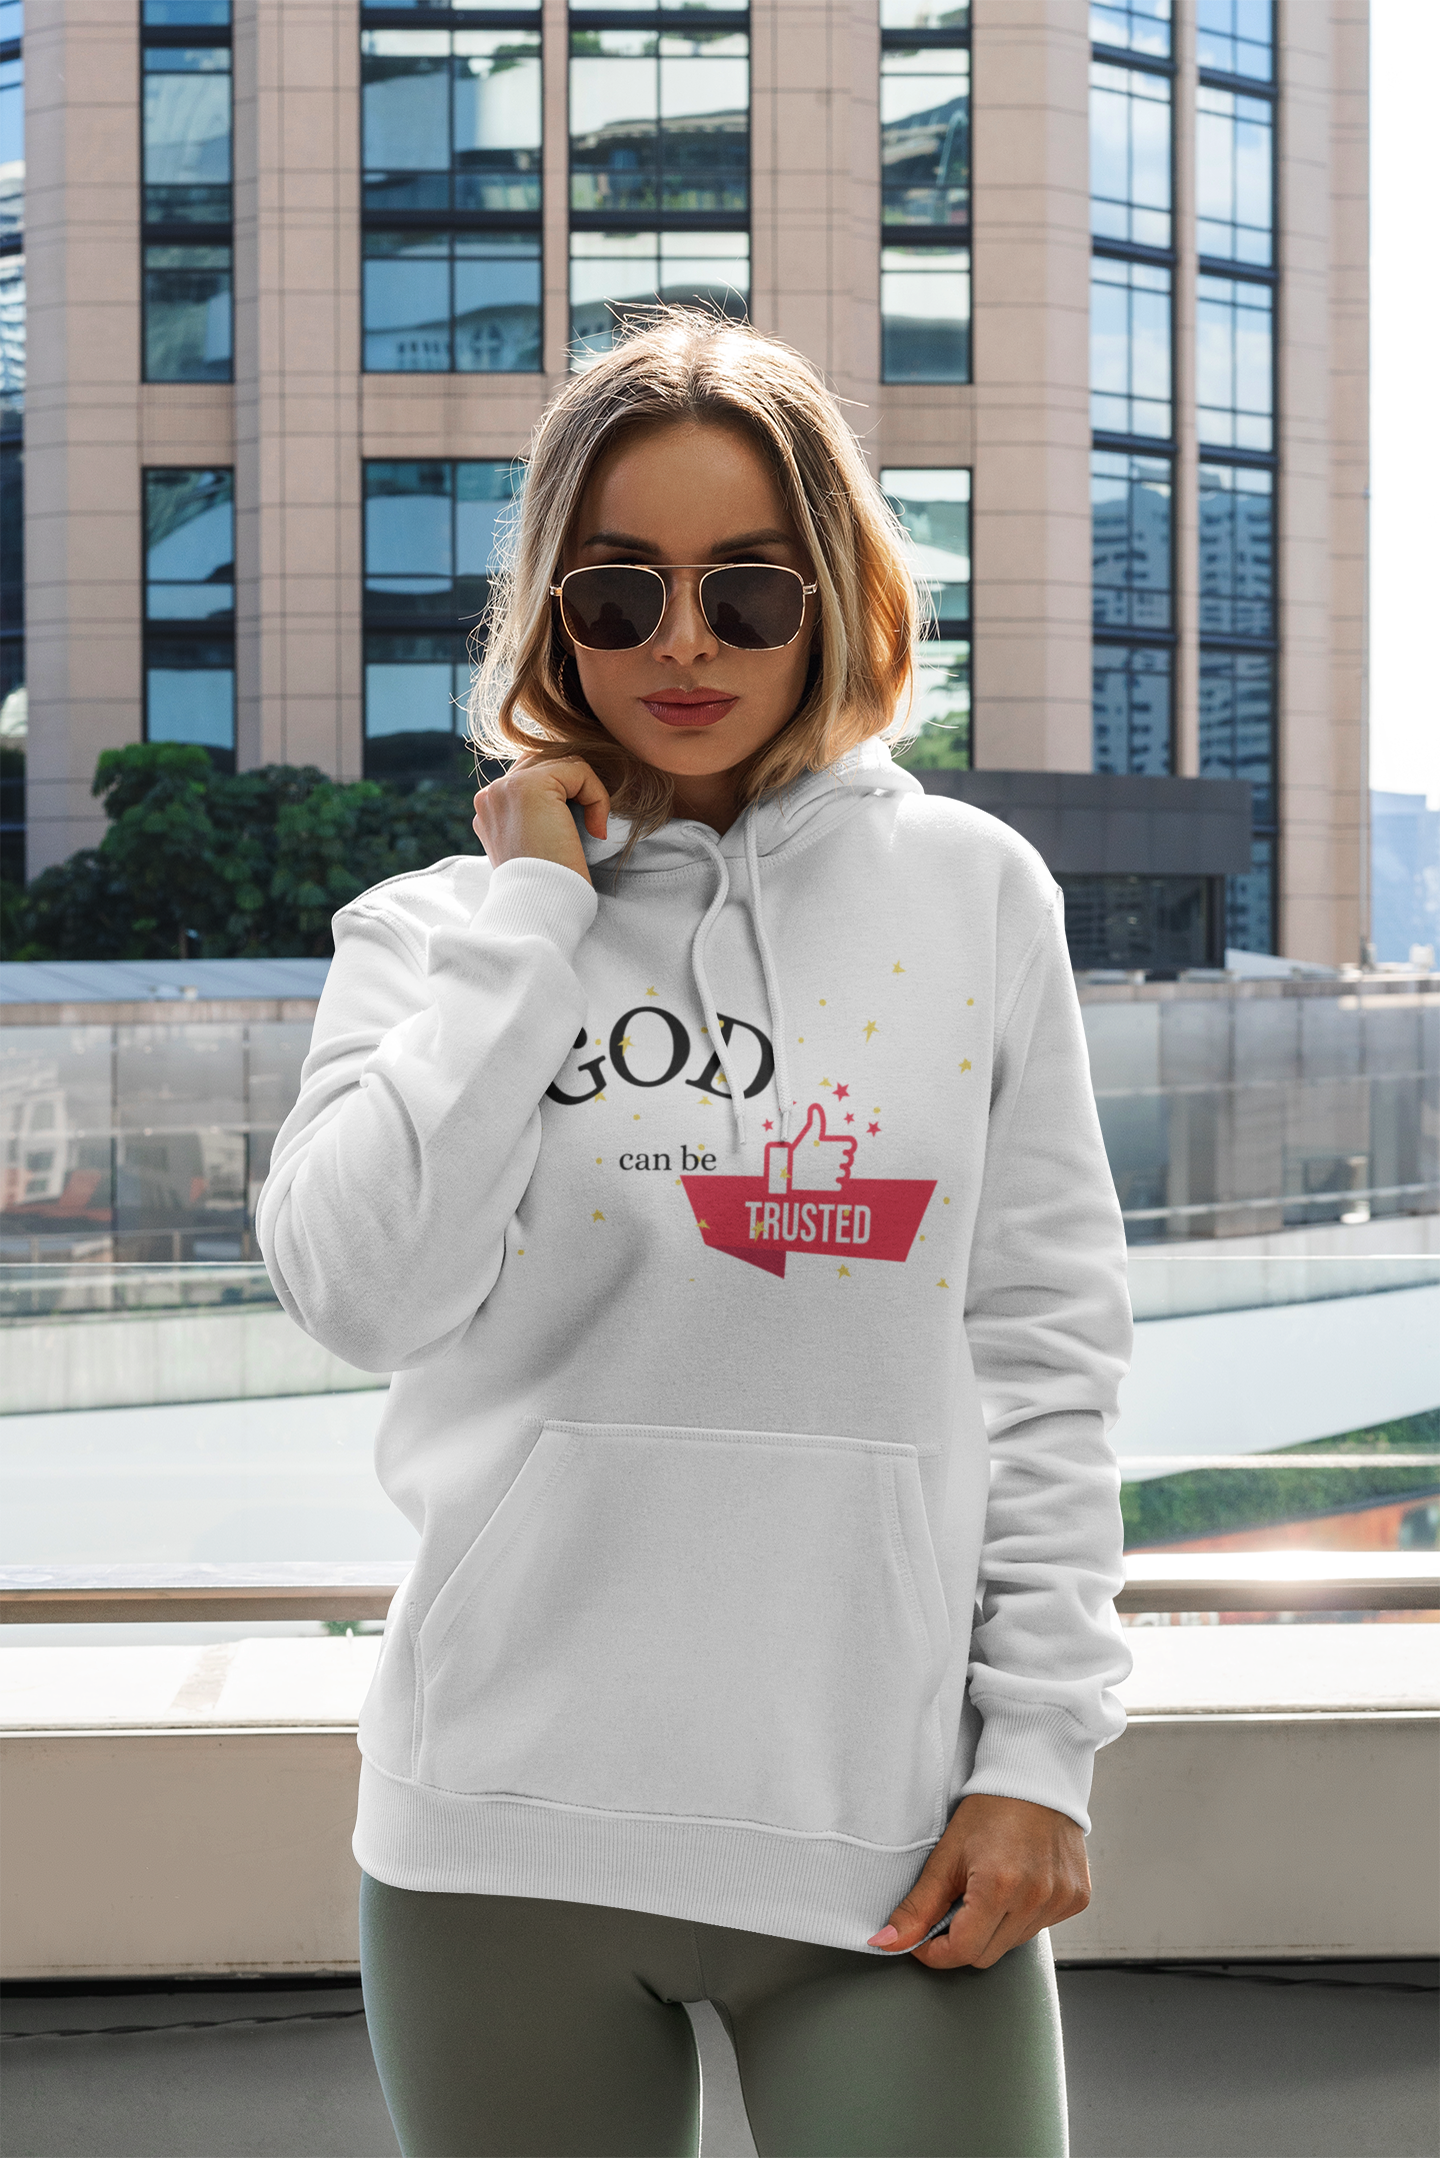 God Can be Trusted Motivational Hoodie - Unisex - Motivational Treats